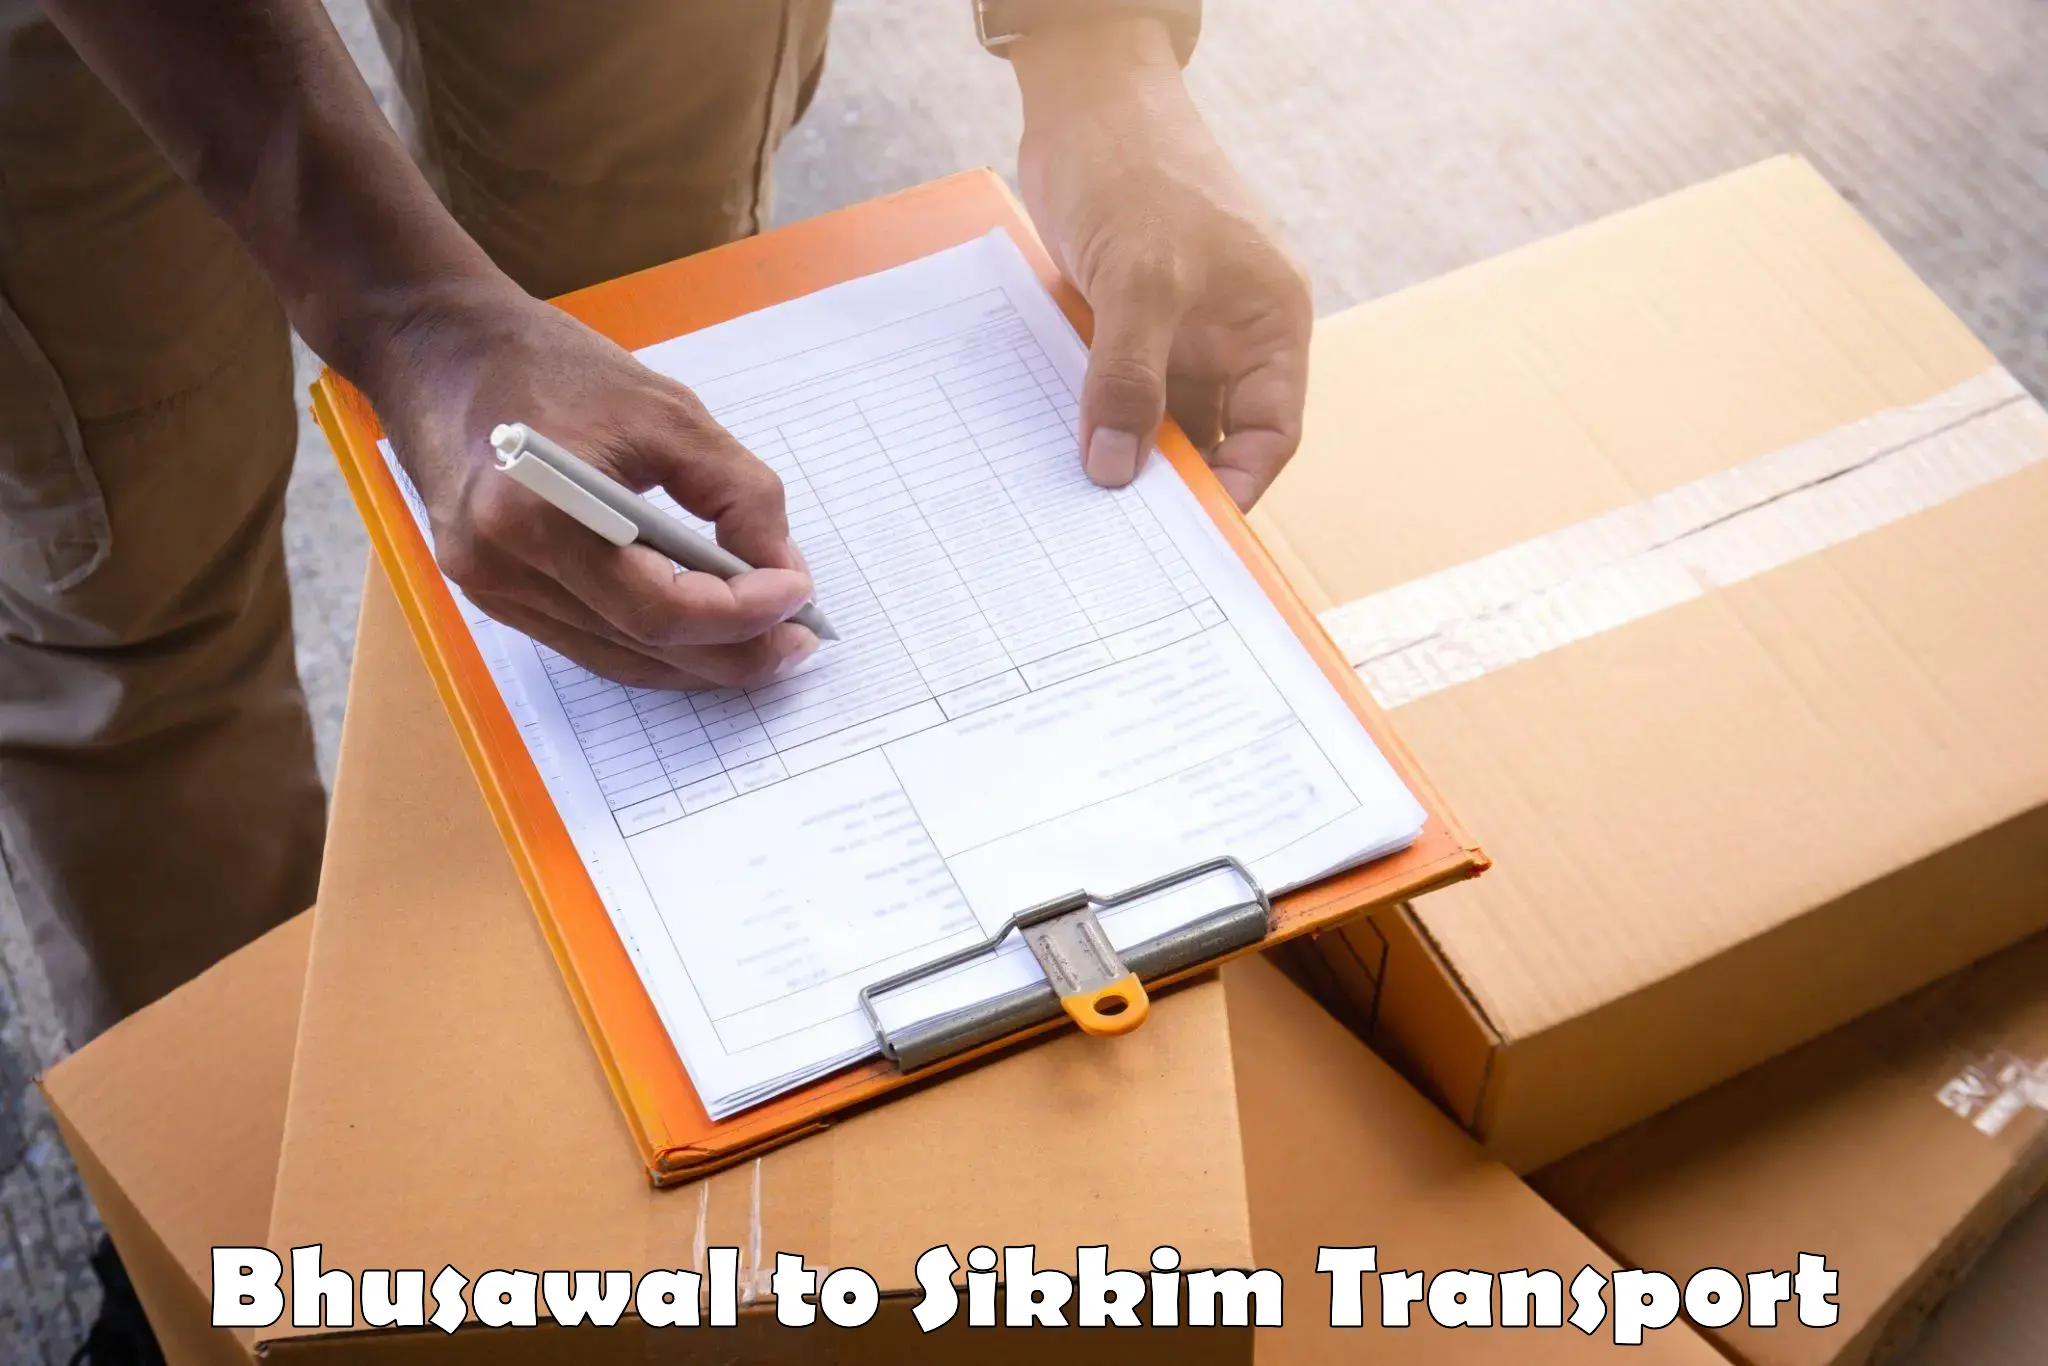 Cargo train transport services Bhusawal to Sikkim